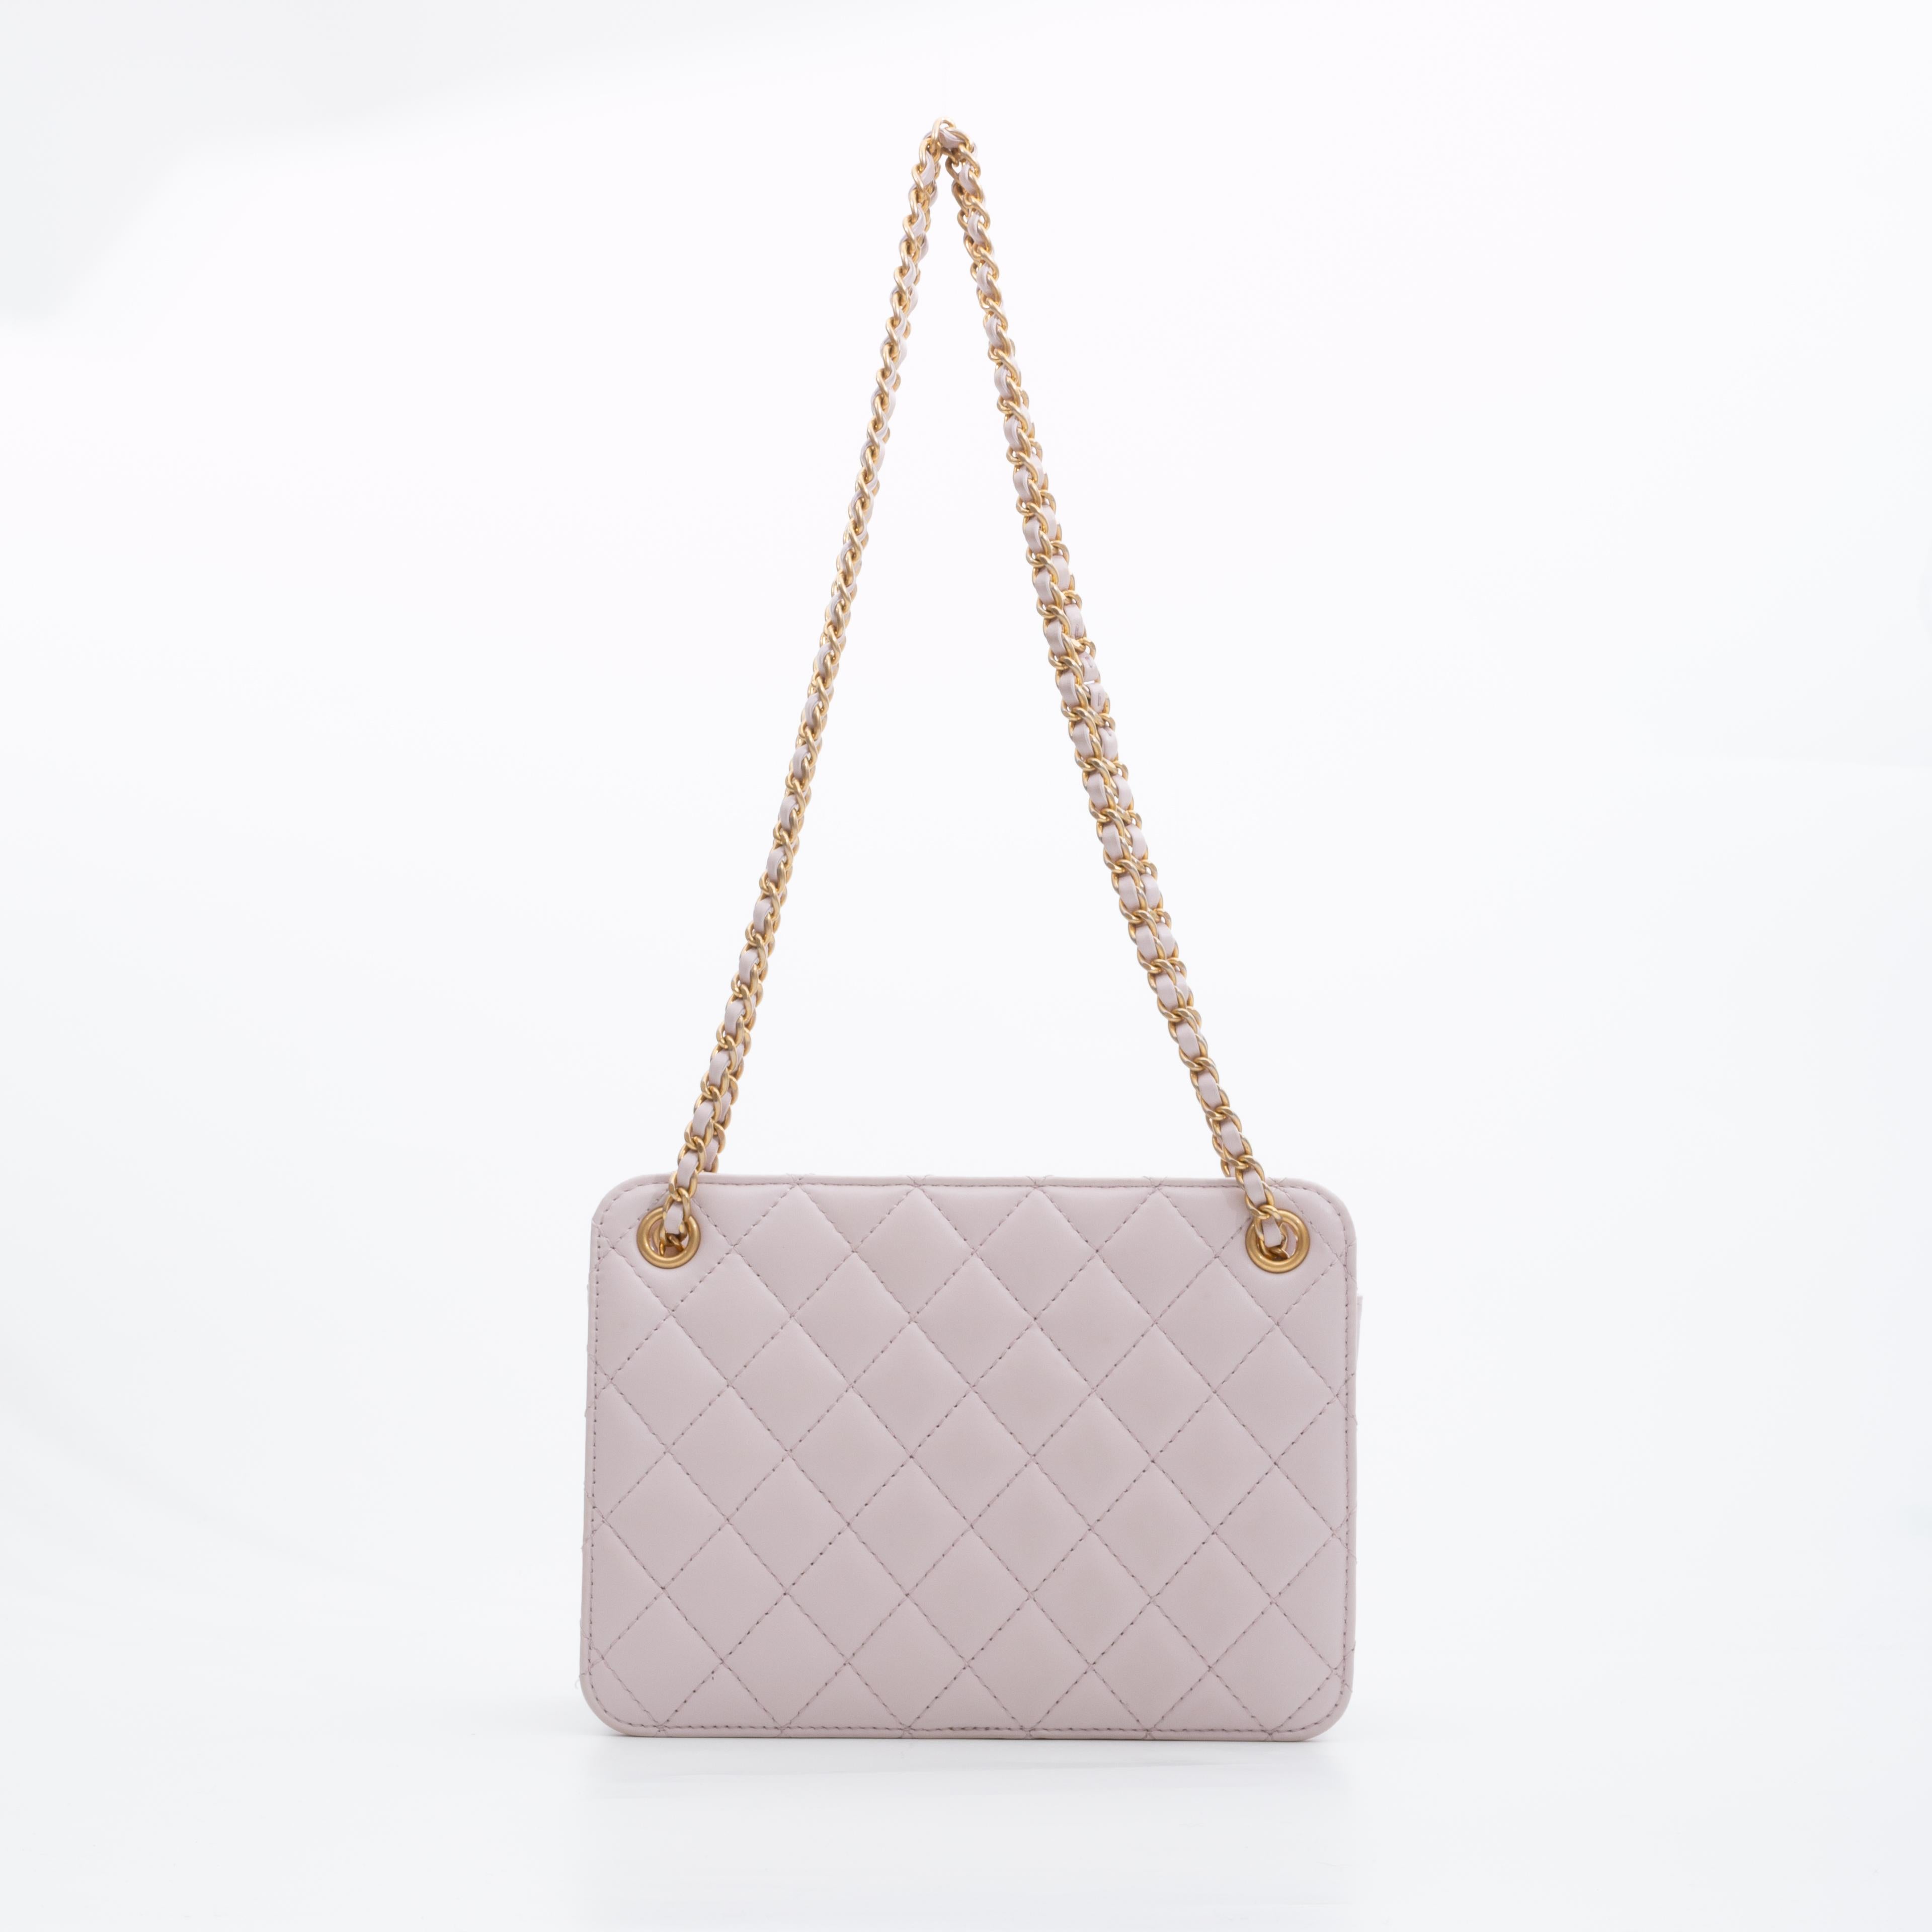 CHANEL LILAC QUILTED SMALL CHAIN ACCORDION SMALL TOTE (2020)
Chanel Lilac Small Chain Accordion Tote Small (2020)

This bag features pink leather, diamond quilting, chain interlaced with leather logo embroidered on front, gold tone hardware, dual